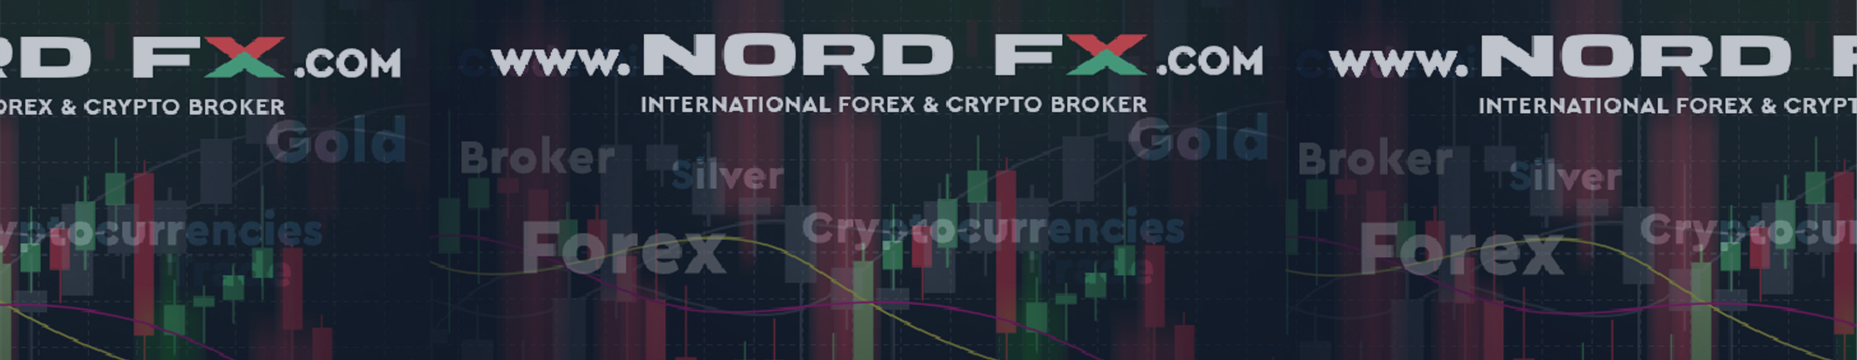 December 2020 Results: NordFX's Most Successful Trader's Profit Exceeds $100,000